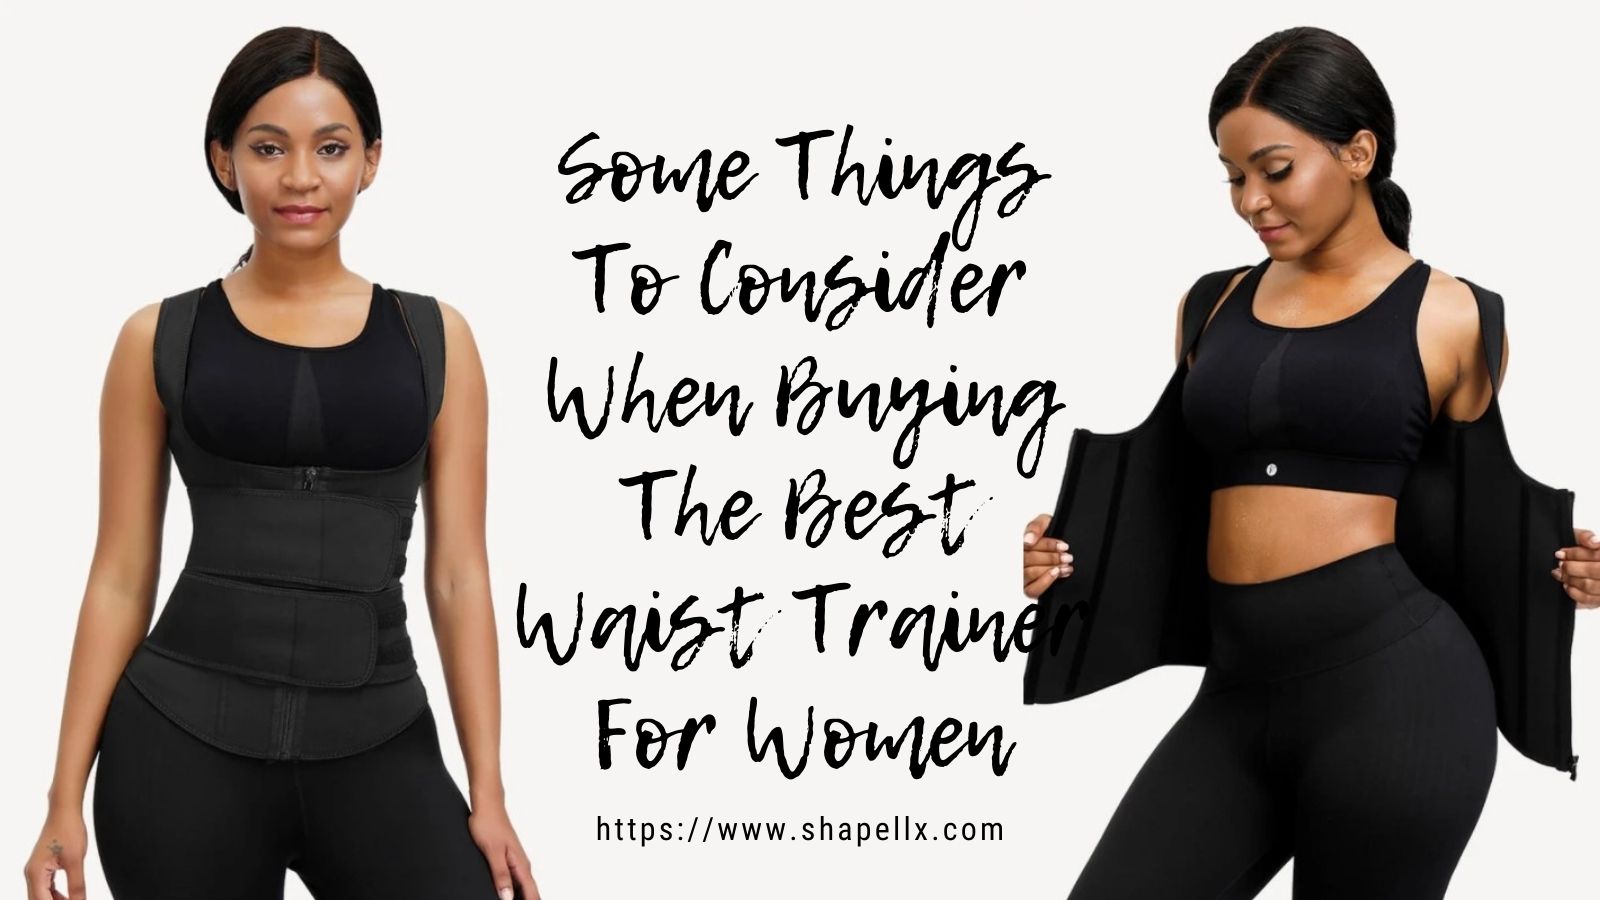 Some Things To Consider When Buying The Best Waist Trainer For Women